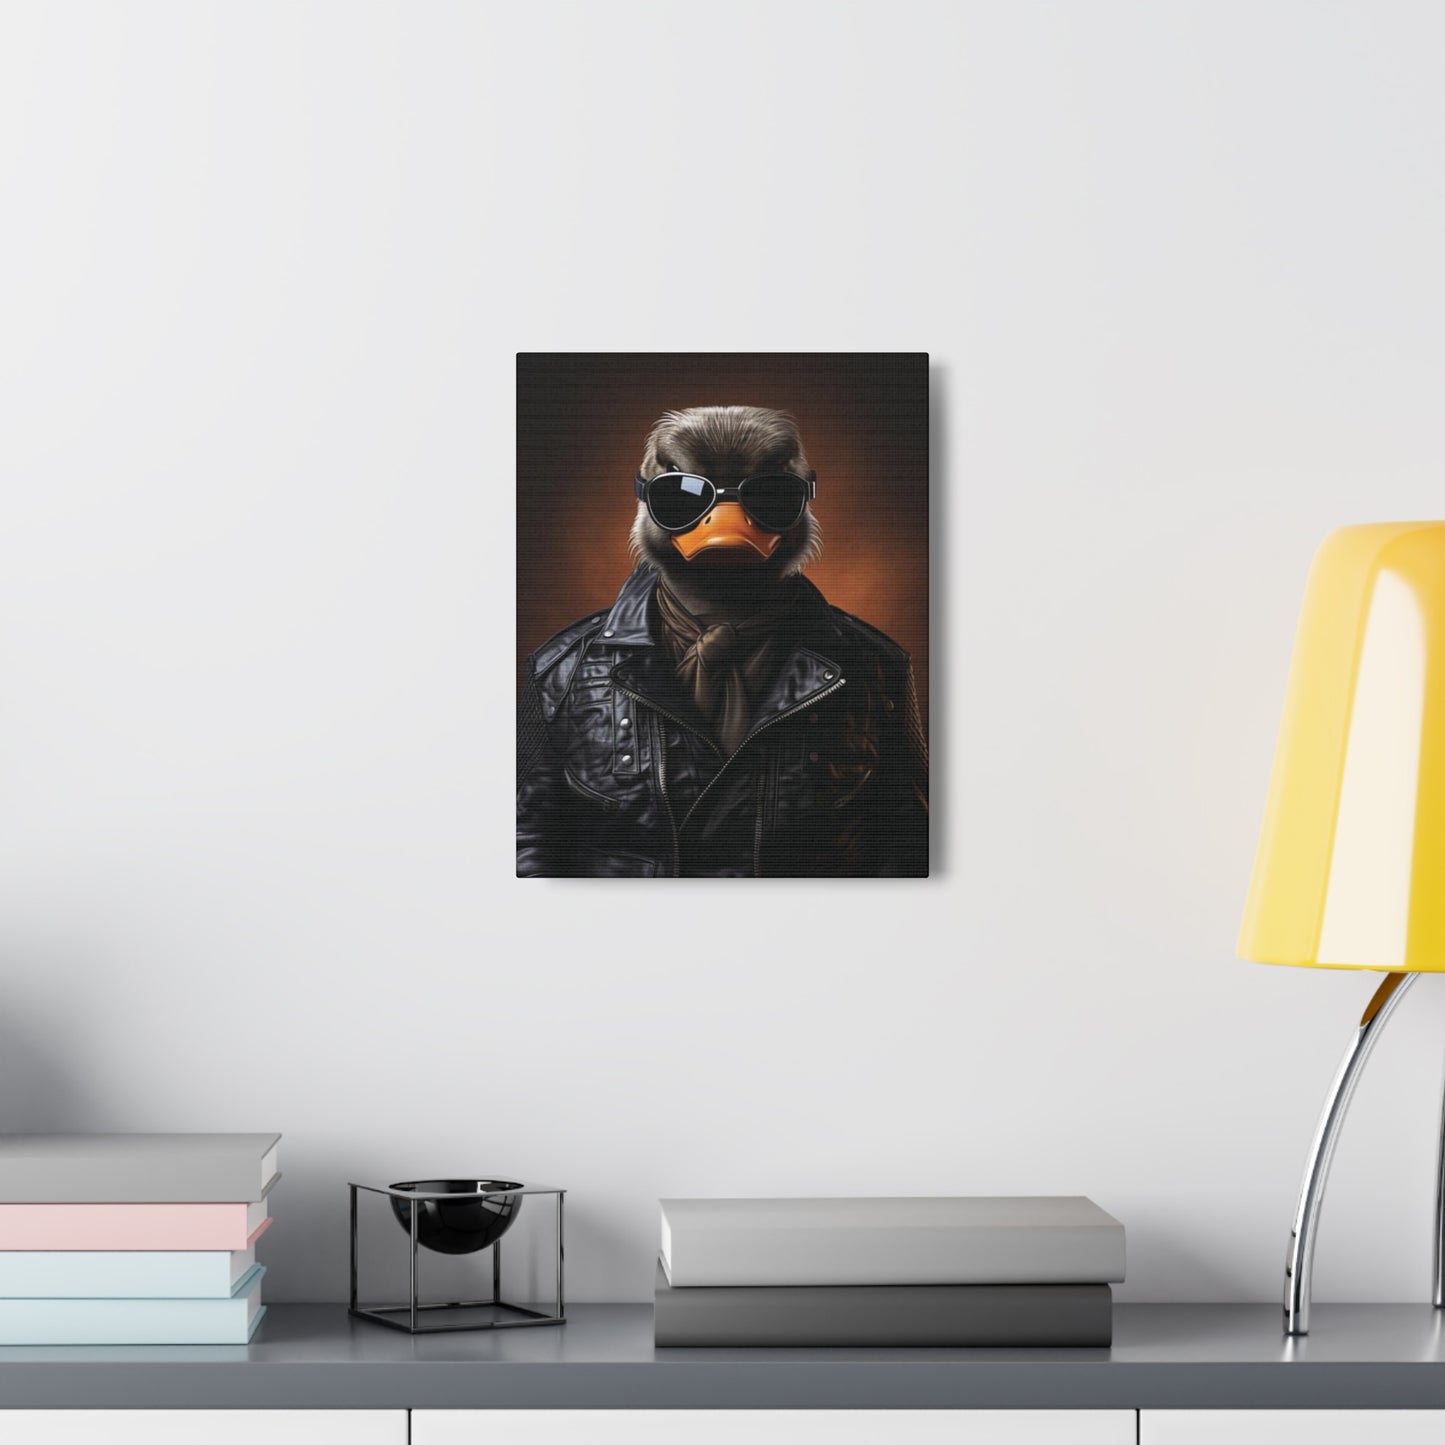 Duck Leather | Canvas Gallery Wrap | Wall Art